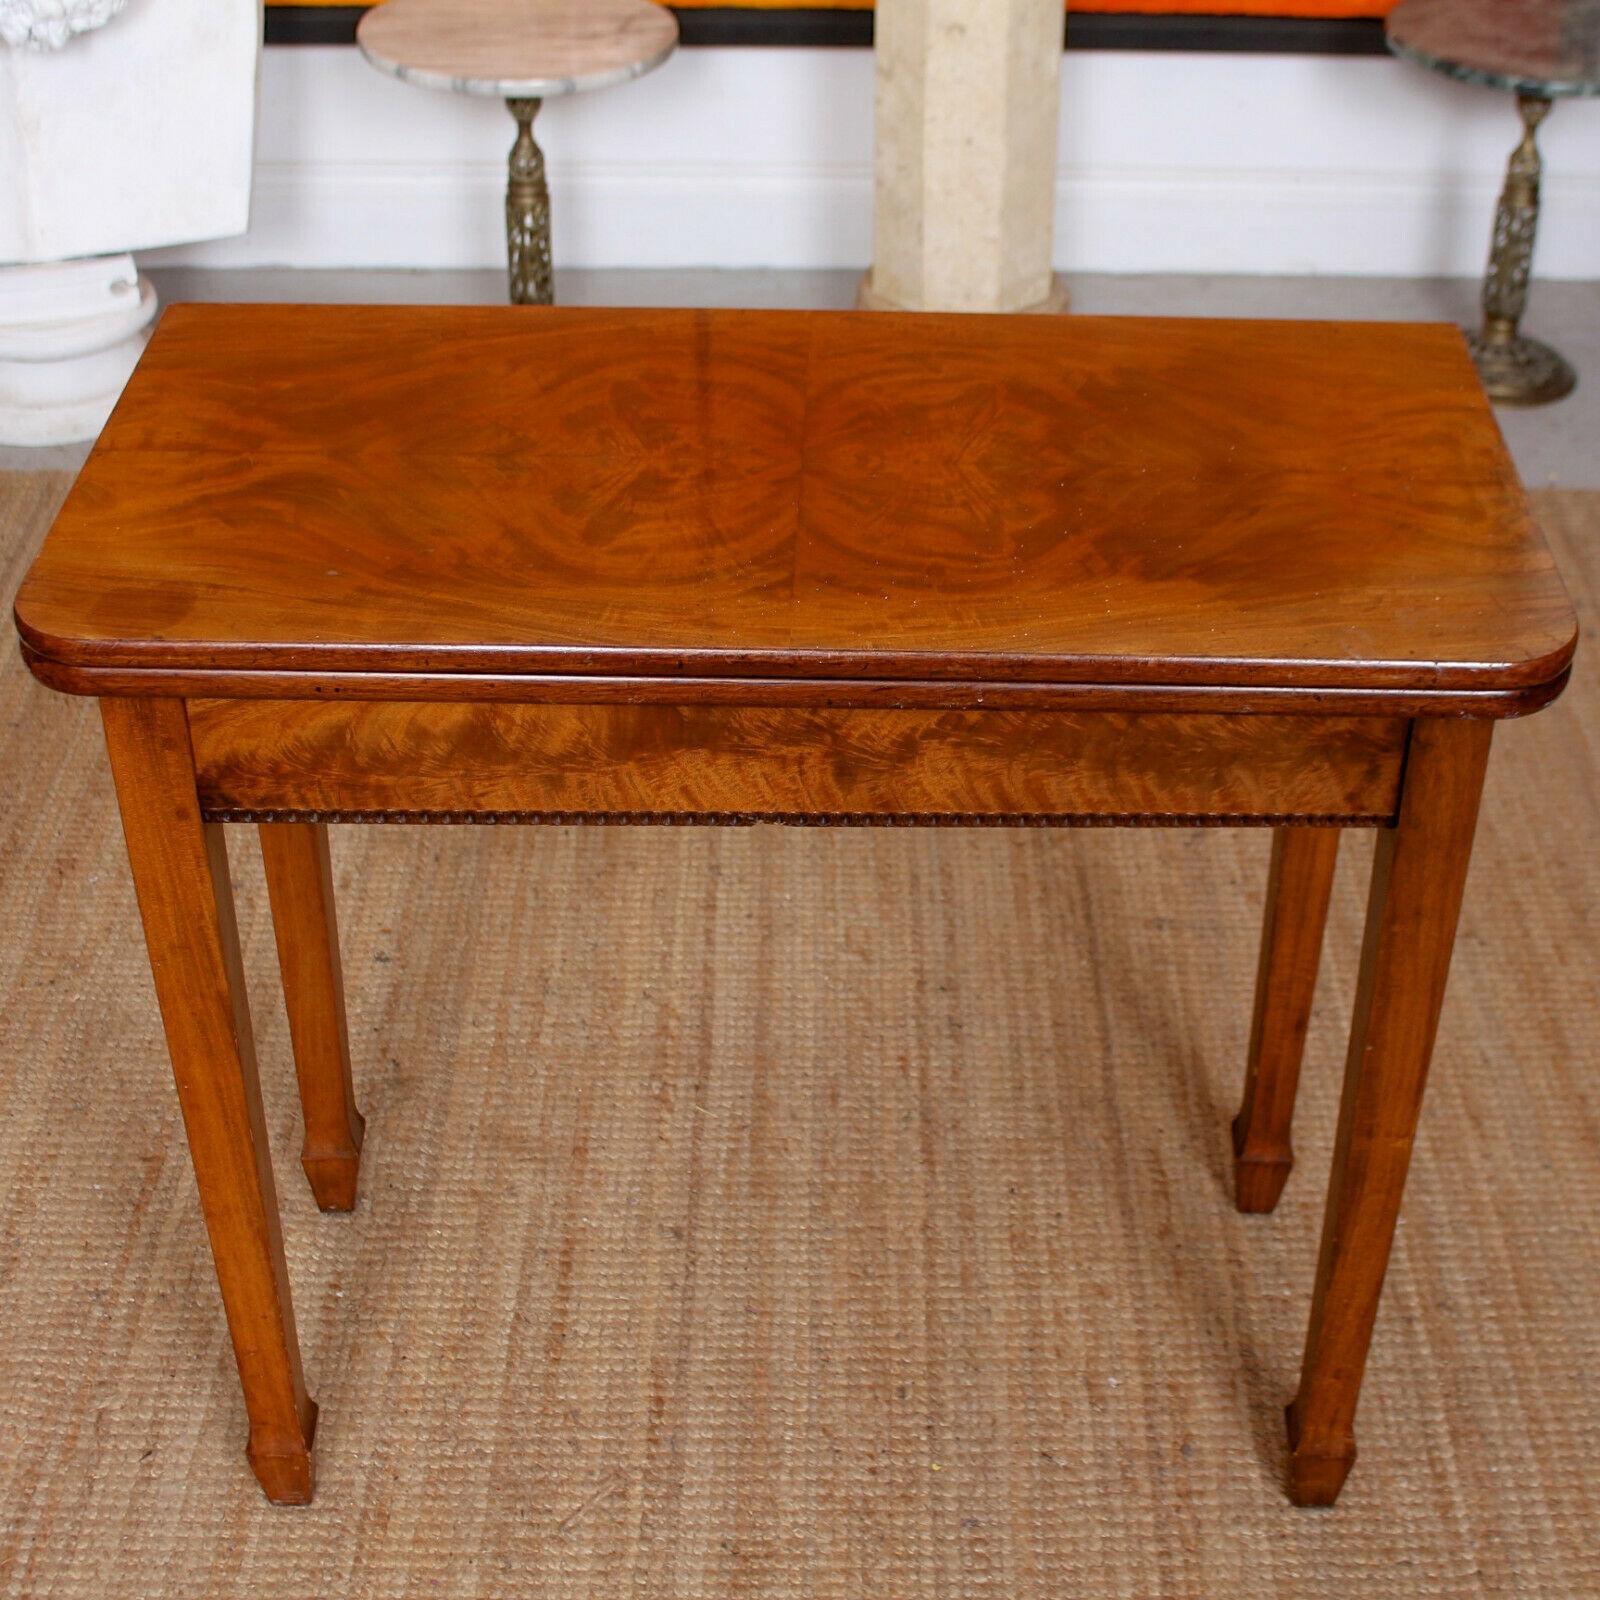 English Writing Table 19th Century Flamed Mahogany Folding Card Console Table For Sale 1